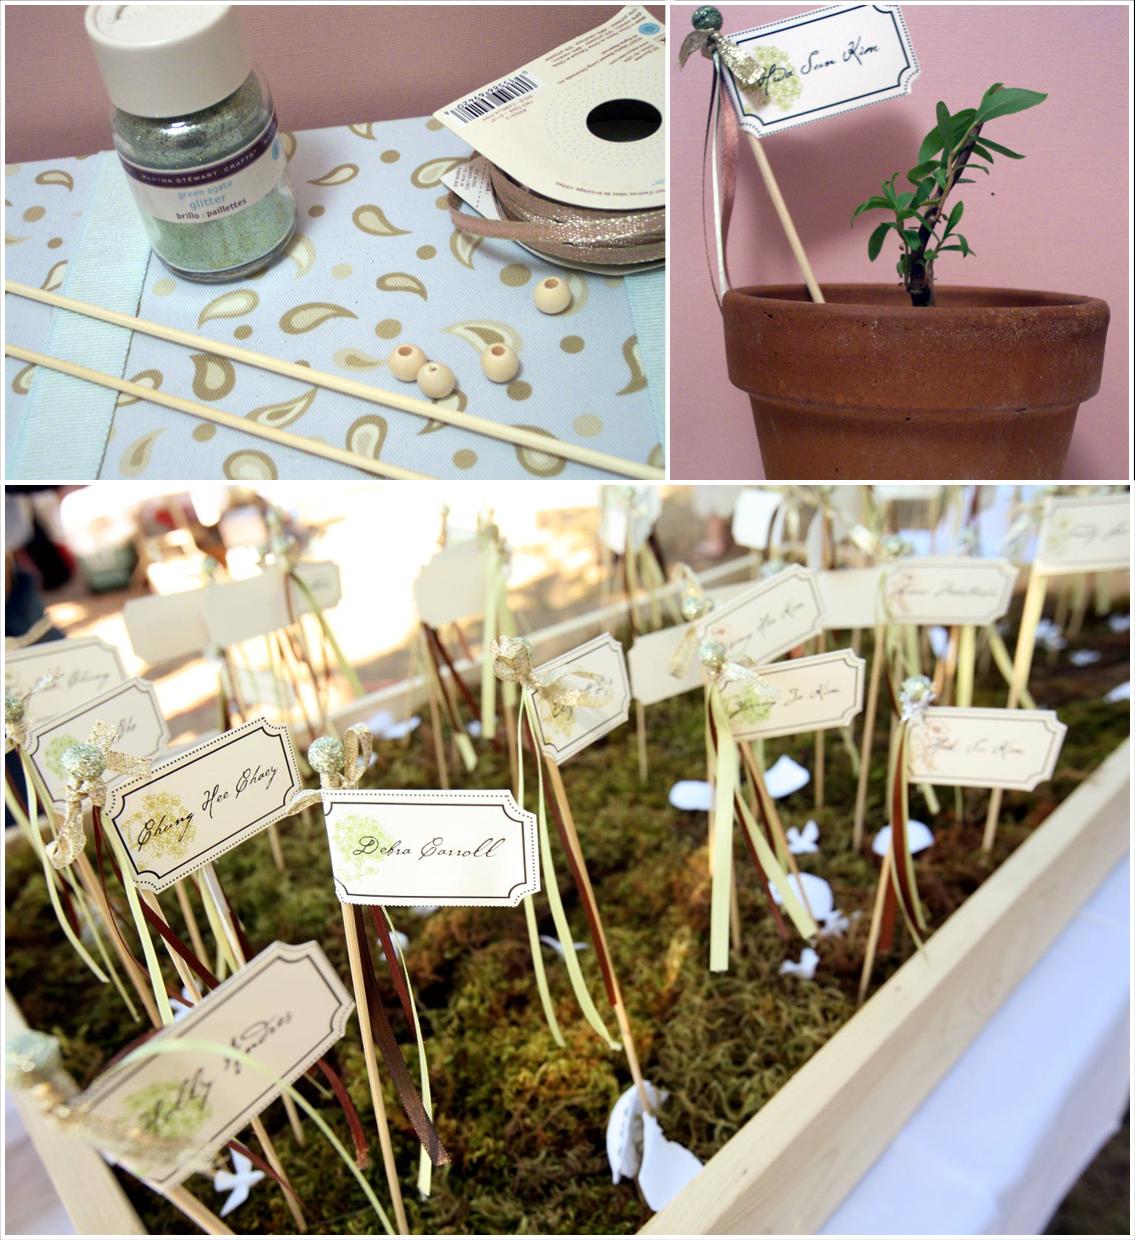 DIY wedding potted plant favors and escort cards